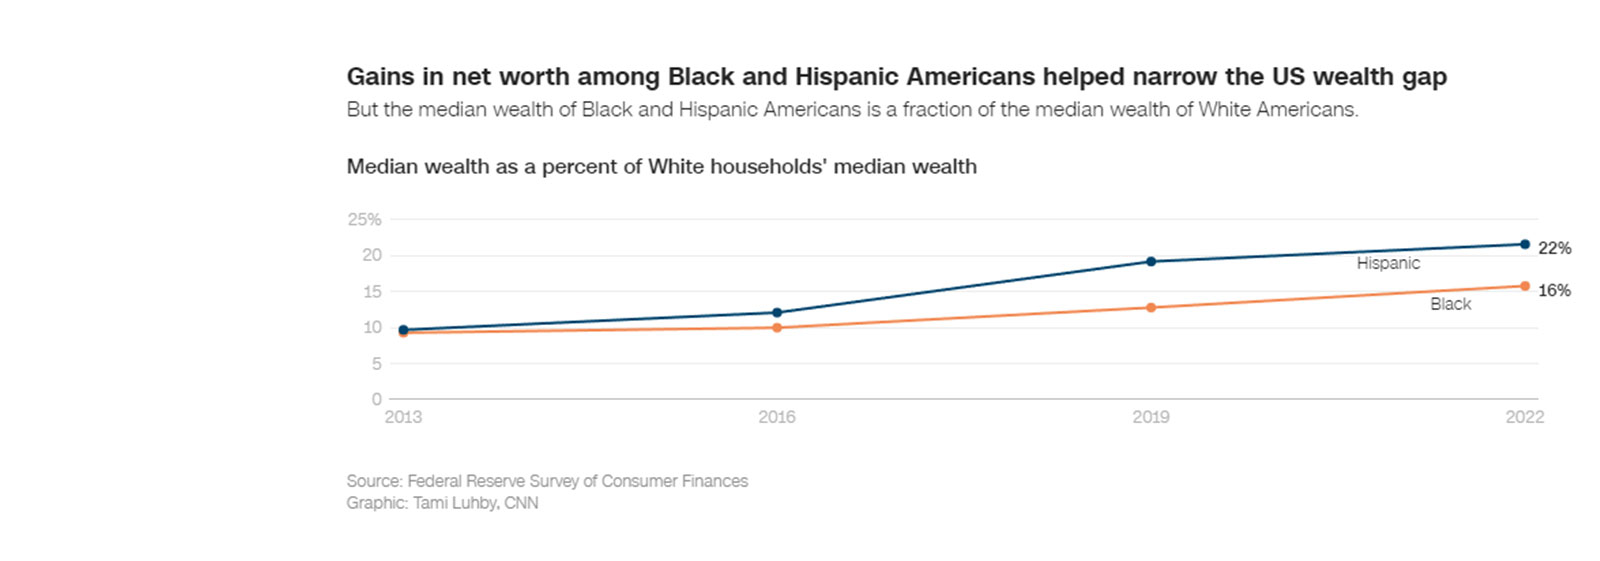 Gains in net worth among Black and Hispanic Americans helped narrow the US wealth gap But the median wealth of Black and Hispanic Americans is a fraction of the median wealth of White Americans. Median wealth as a percent of White households' median wealth